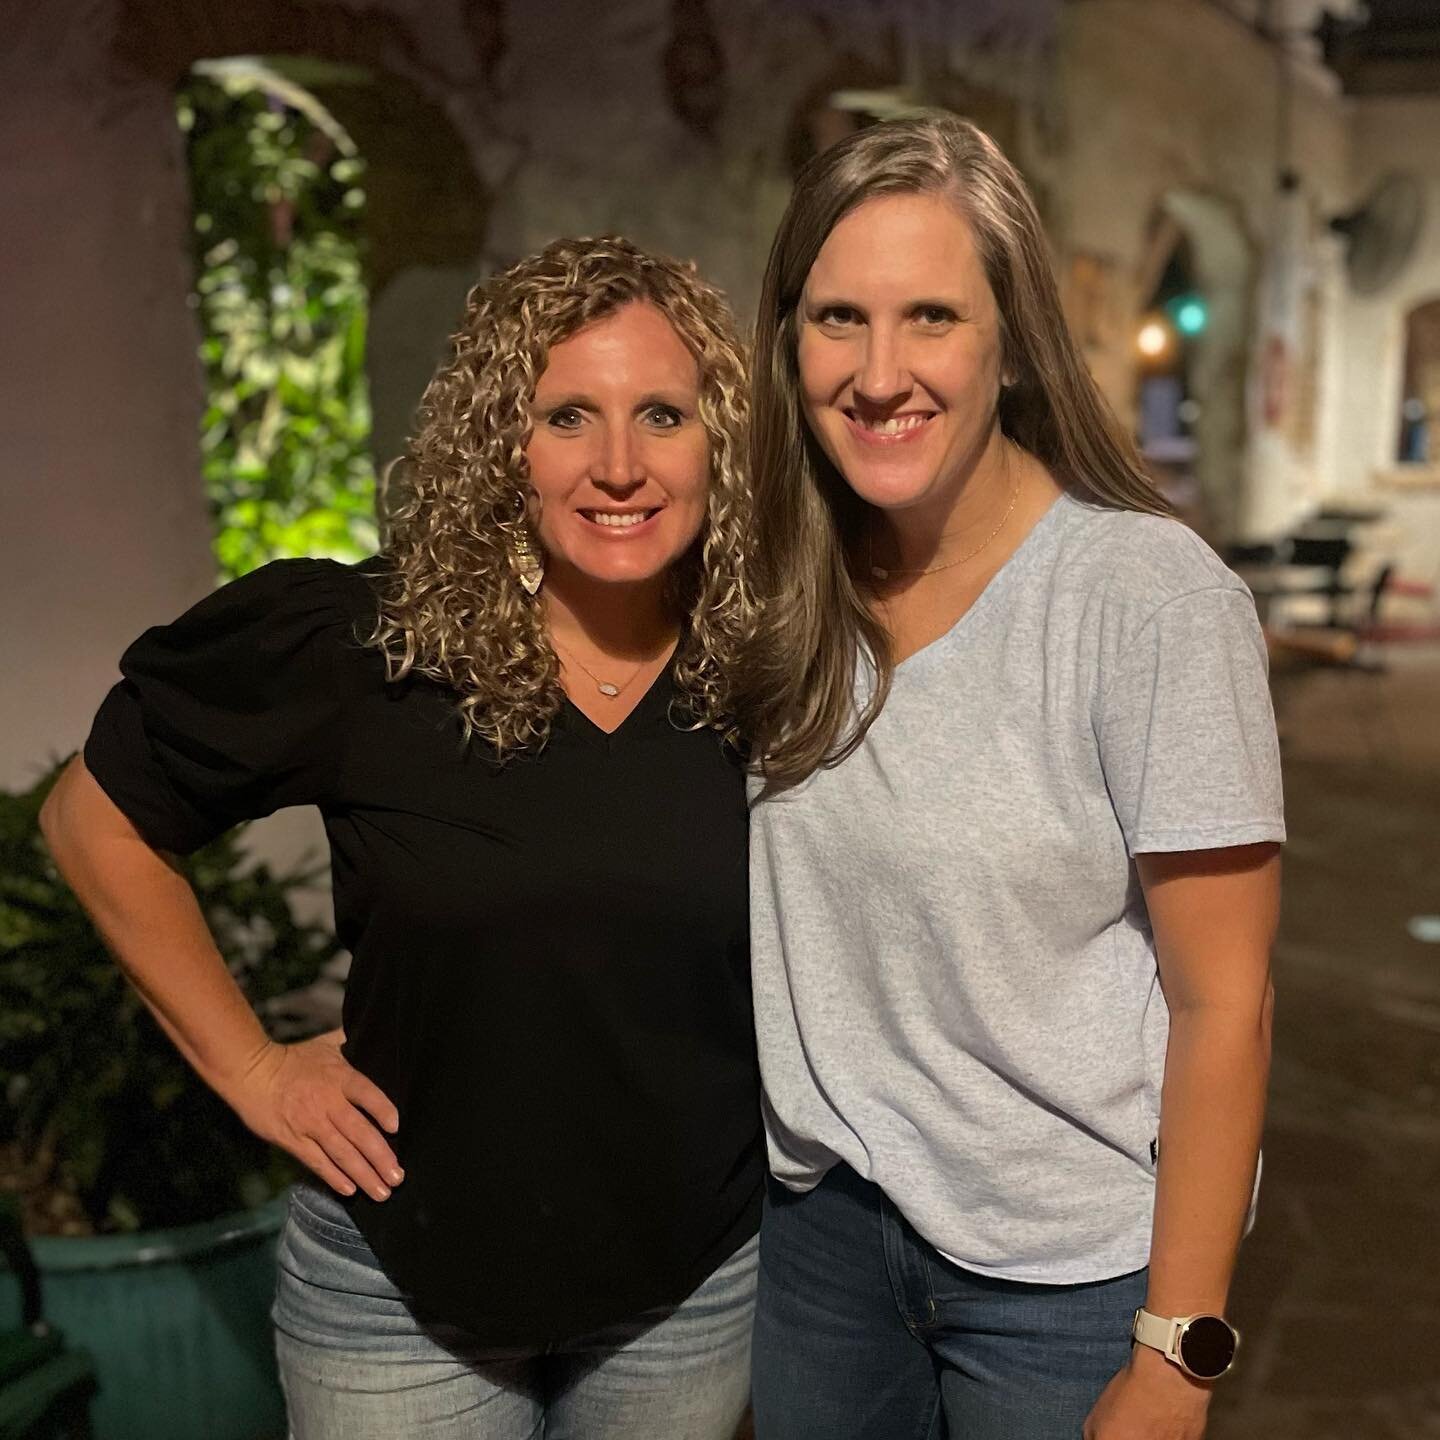 What an absolute gift it was to visit with this sweet, sweet friend of mine this week. Christy is one of my oldest friends (swipe right to see us as kids of the 90s) and is absolute proof of God&rsquo;s goodness in my life. So very grateful to have a